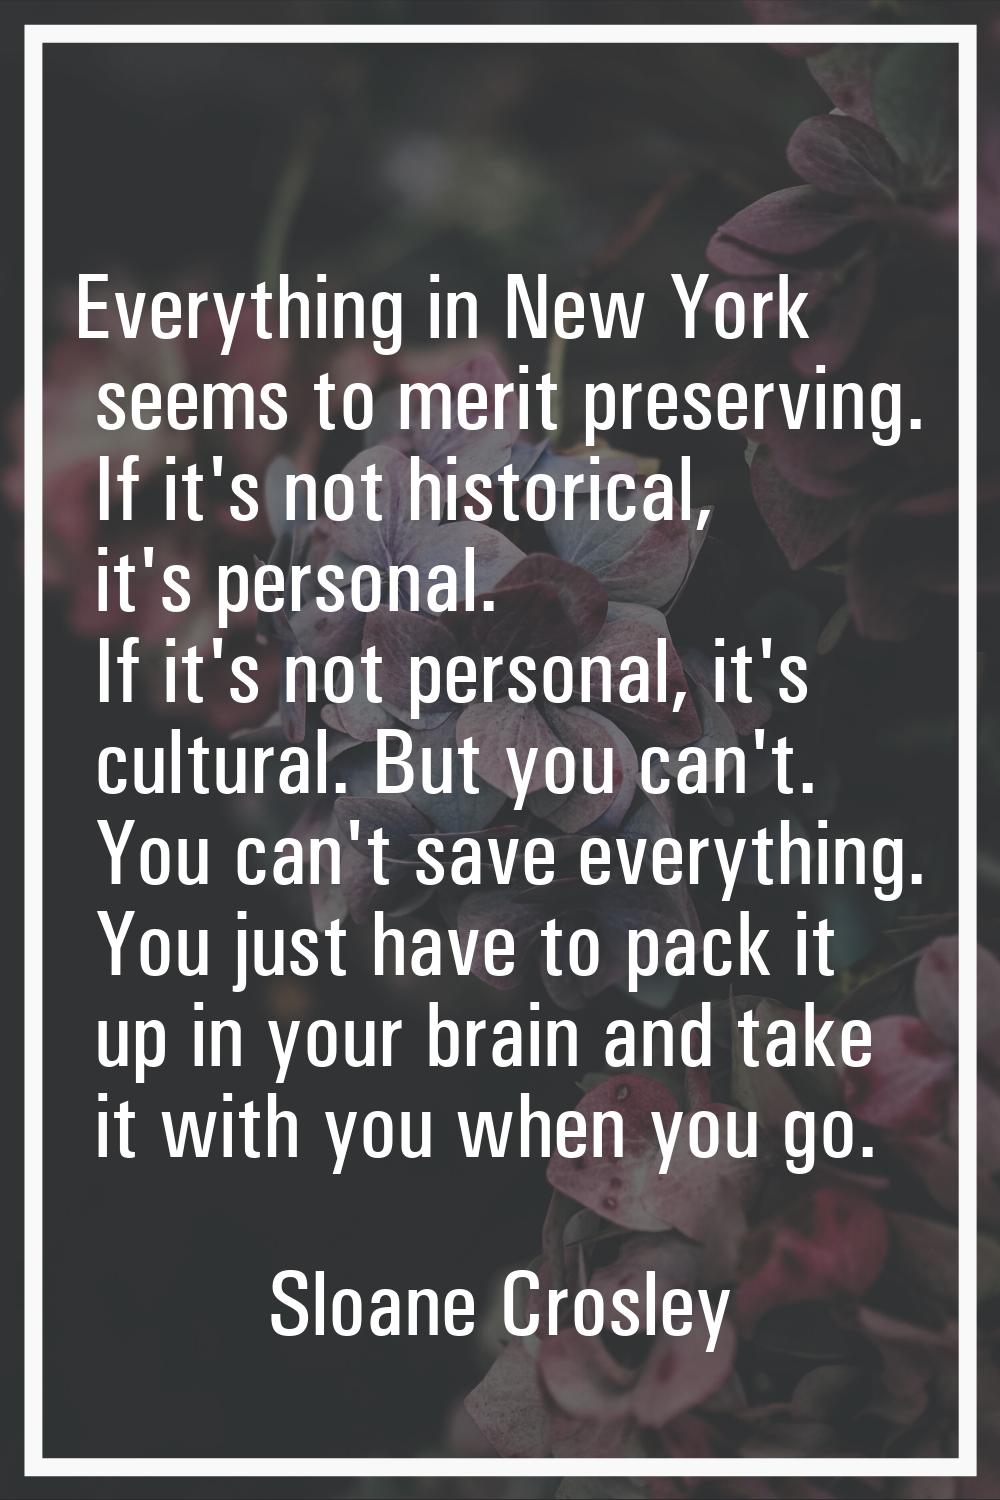 Everything in New York seems to merit preserving. If it's not historical, it's personal. If it's no